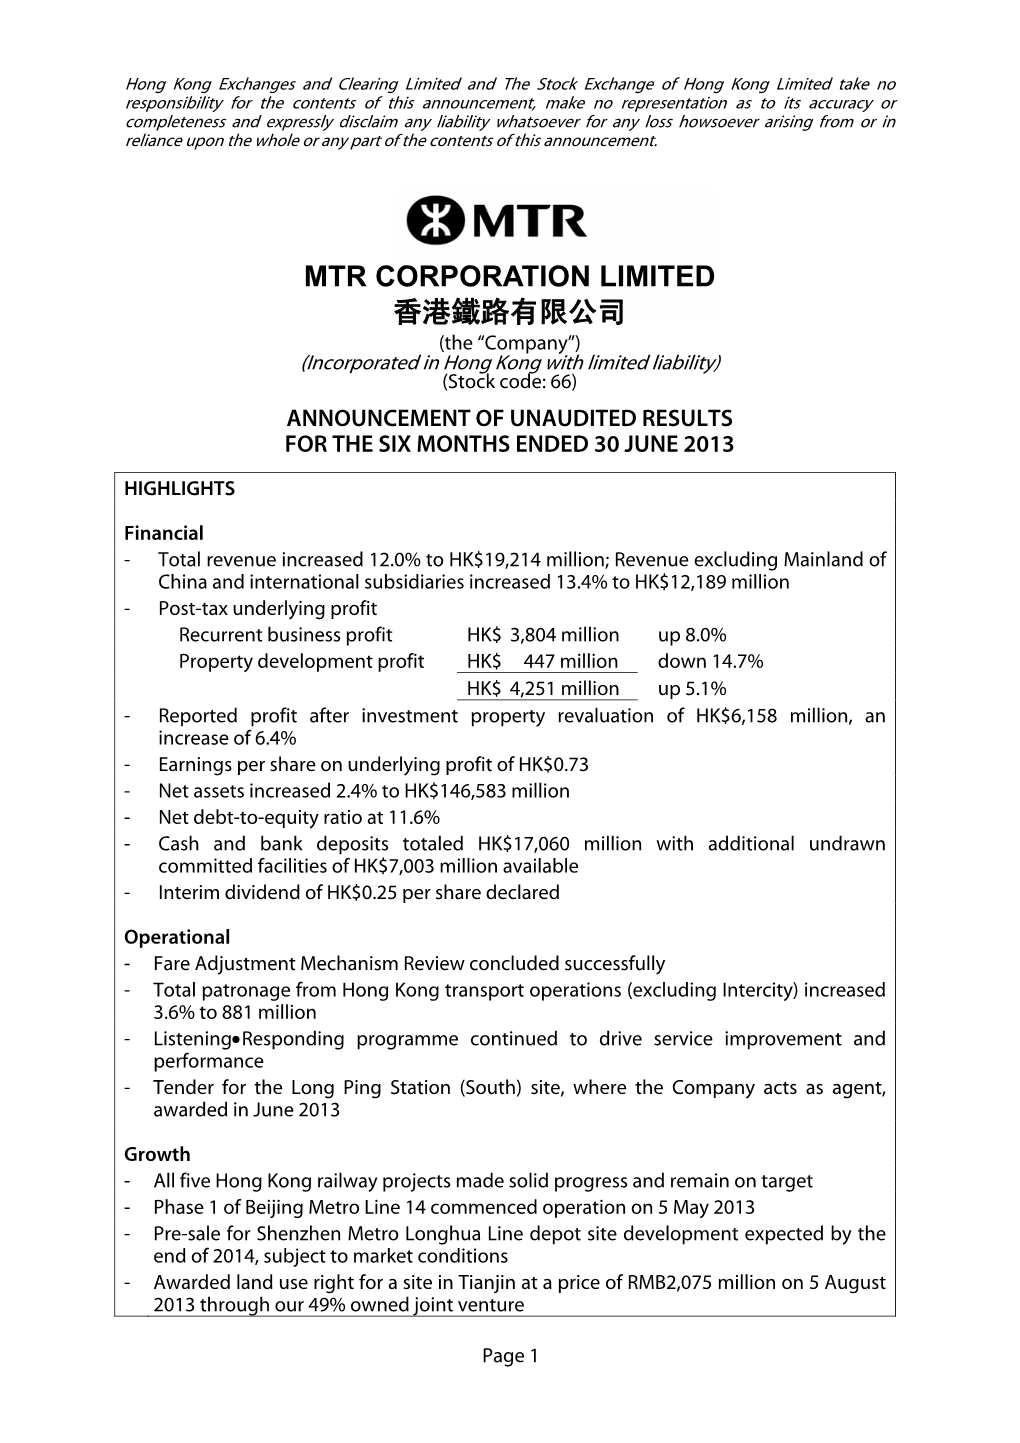 MTR CORPORATION LIMITED 香港鐵路有限公司 (The “Company”) (Incorporated in Hong Kong with Limited Liability) (Stock Code: 66)